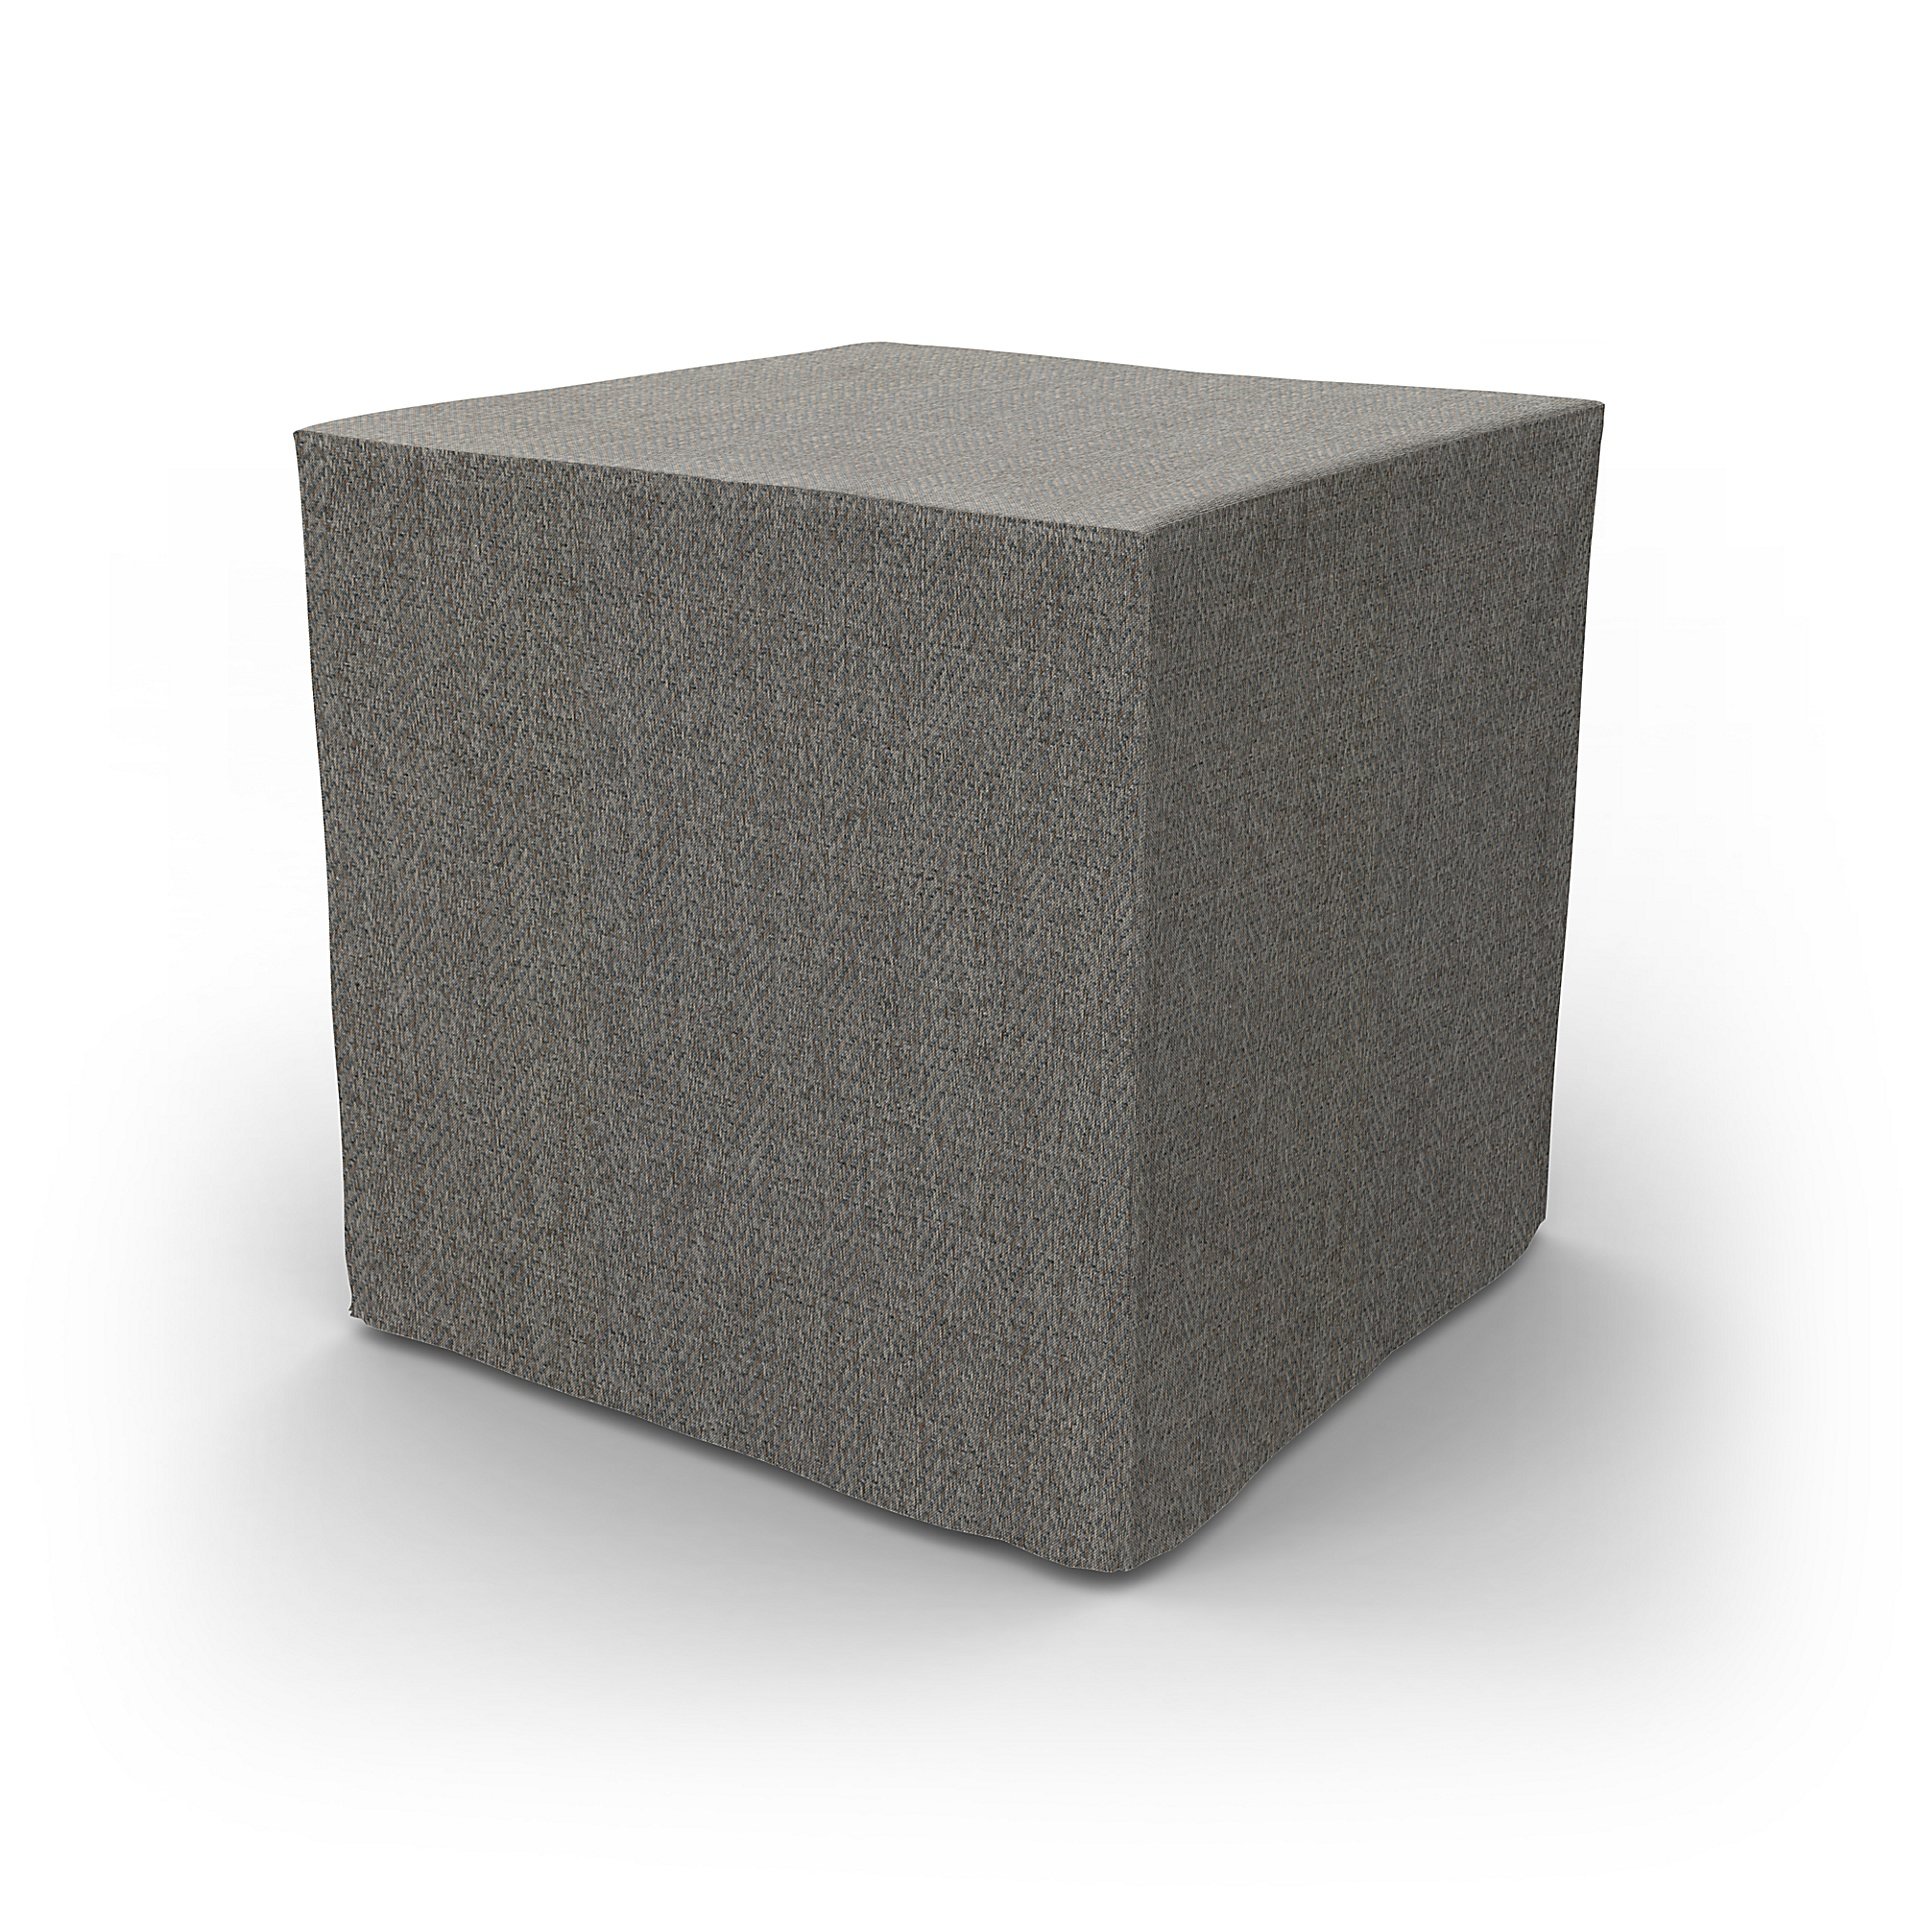 IKEA - Pallbo Footstool Cover, Taupe, Boucle & Texture - Bemz